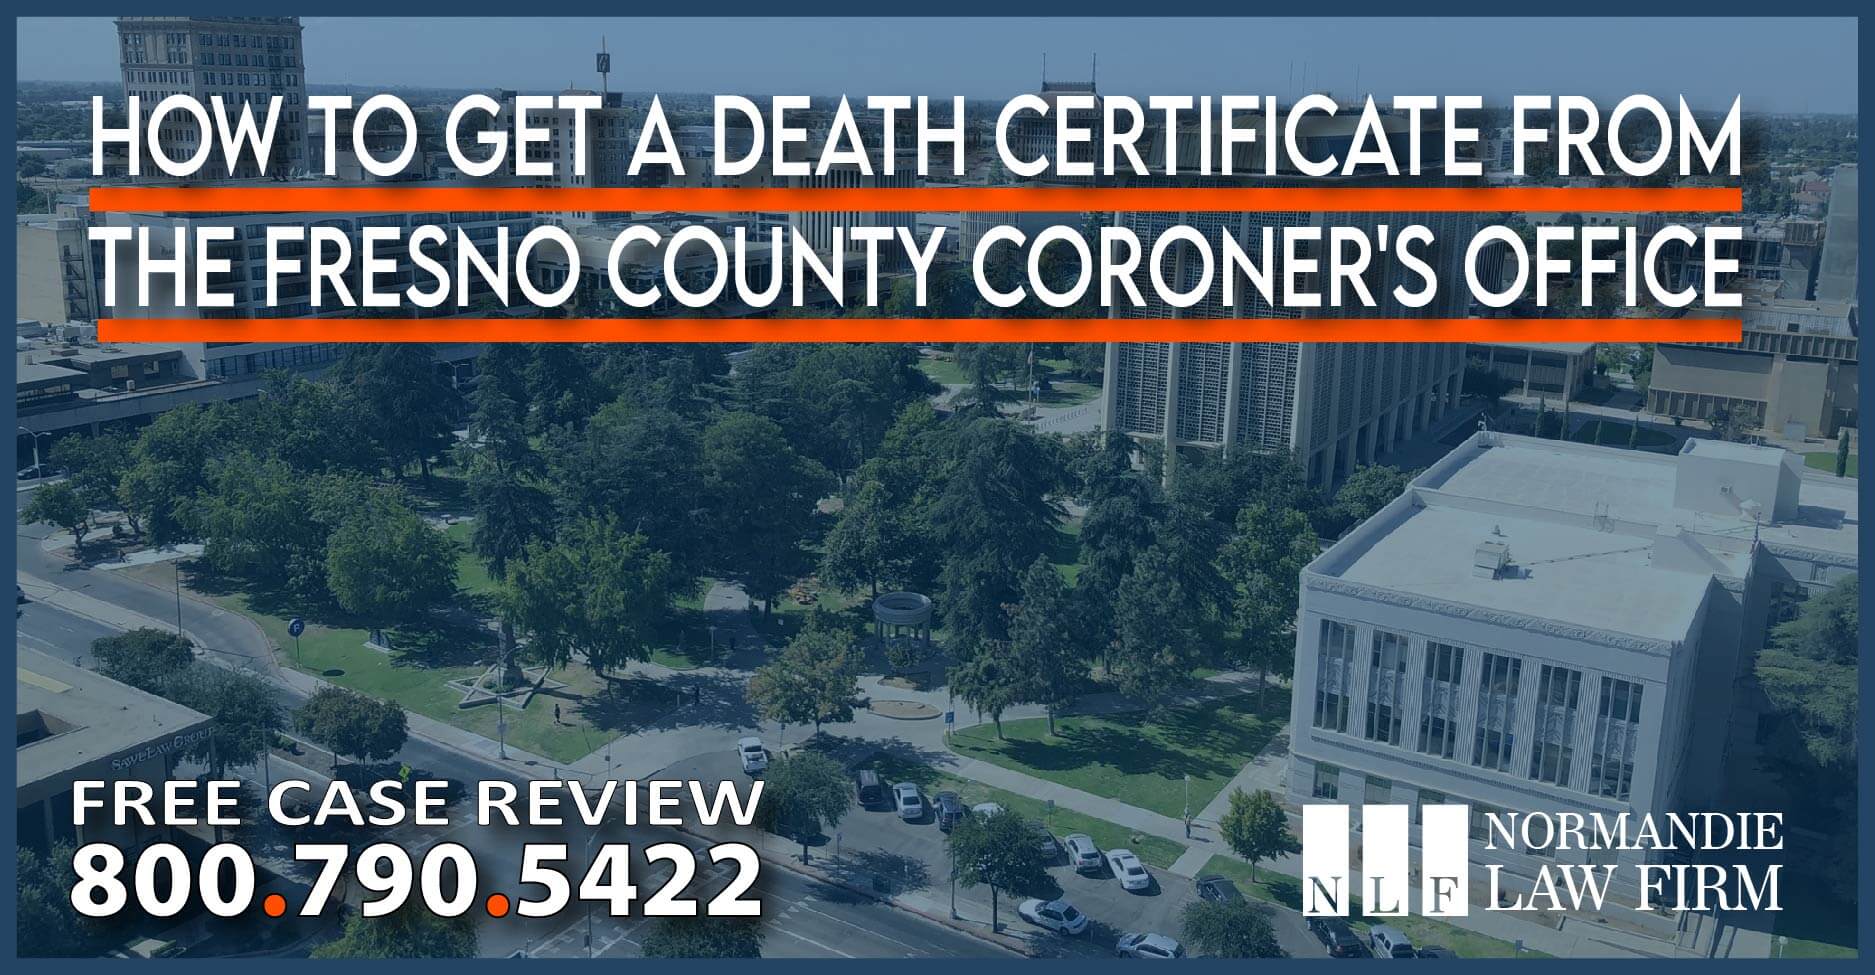 How to get a Death Certificate from the Fresno County Coroner s Office